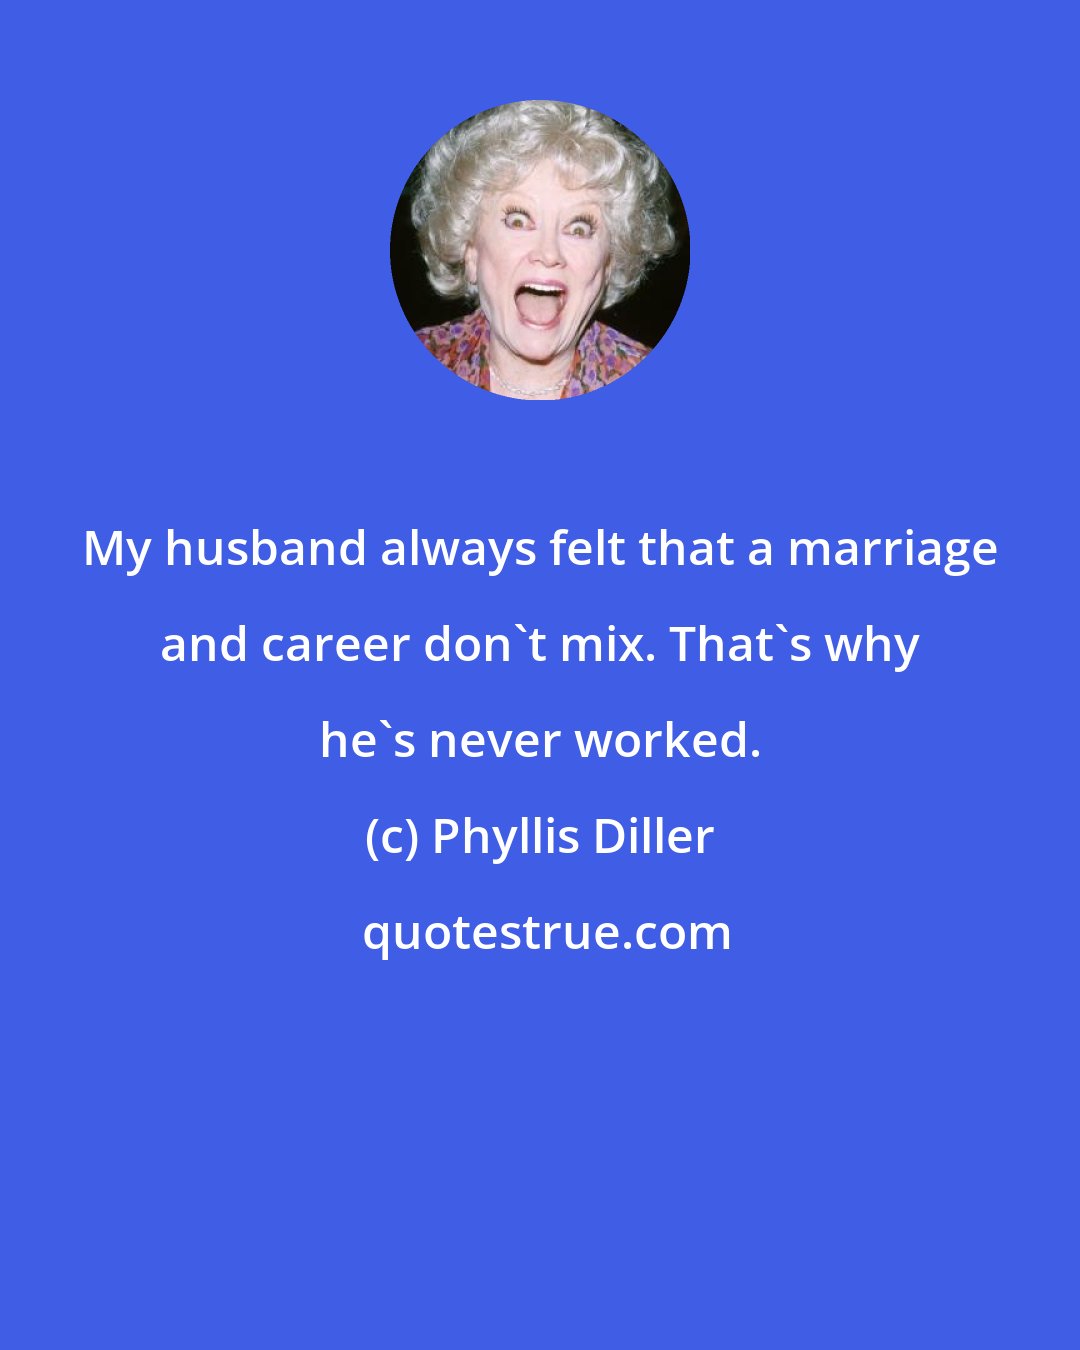 Phyllis Diller: My husband always felt that a marriage and career don't mix. That's why he's never worked.